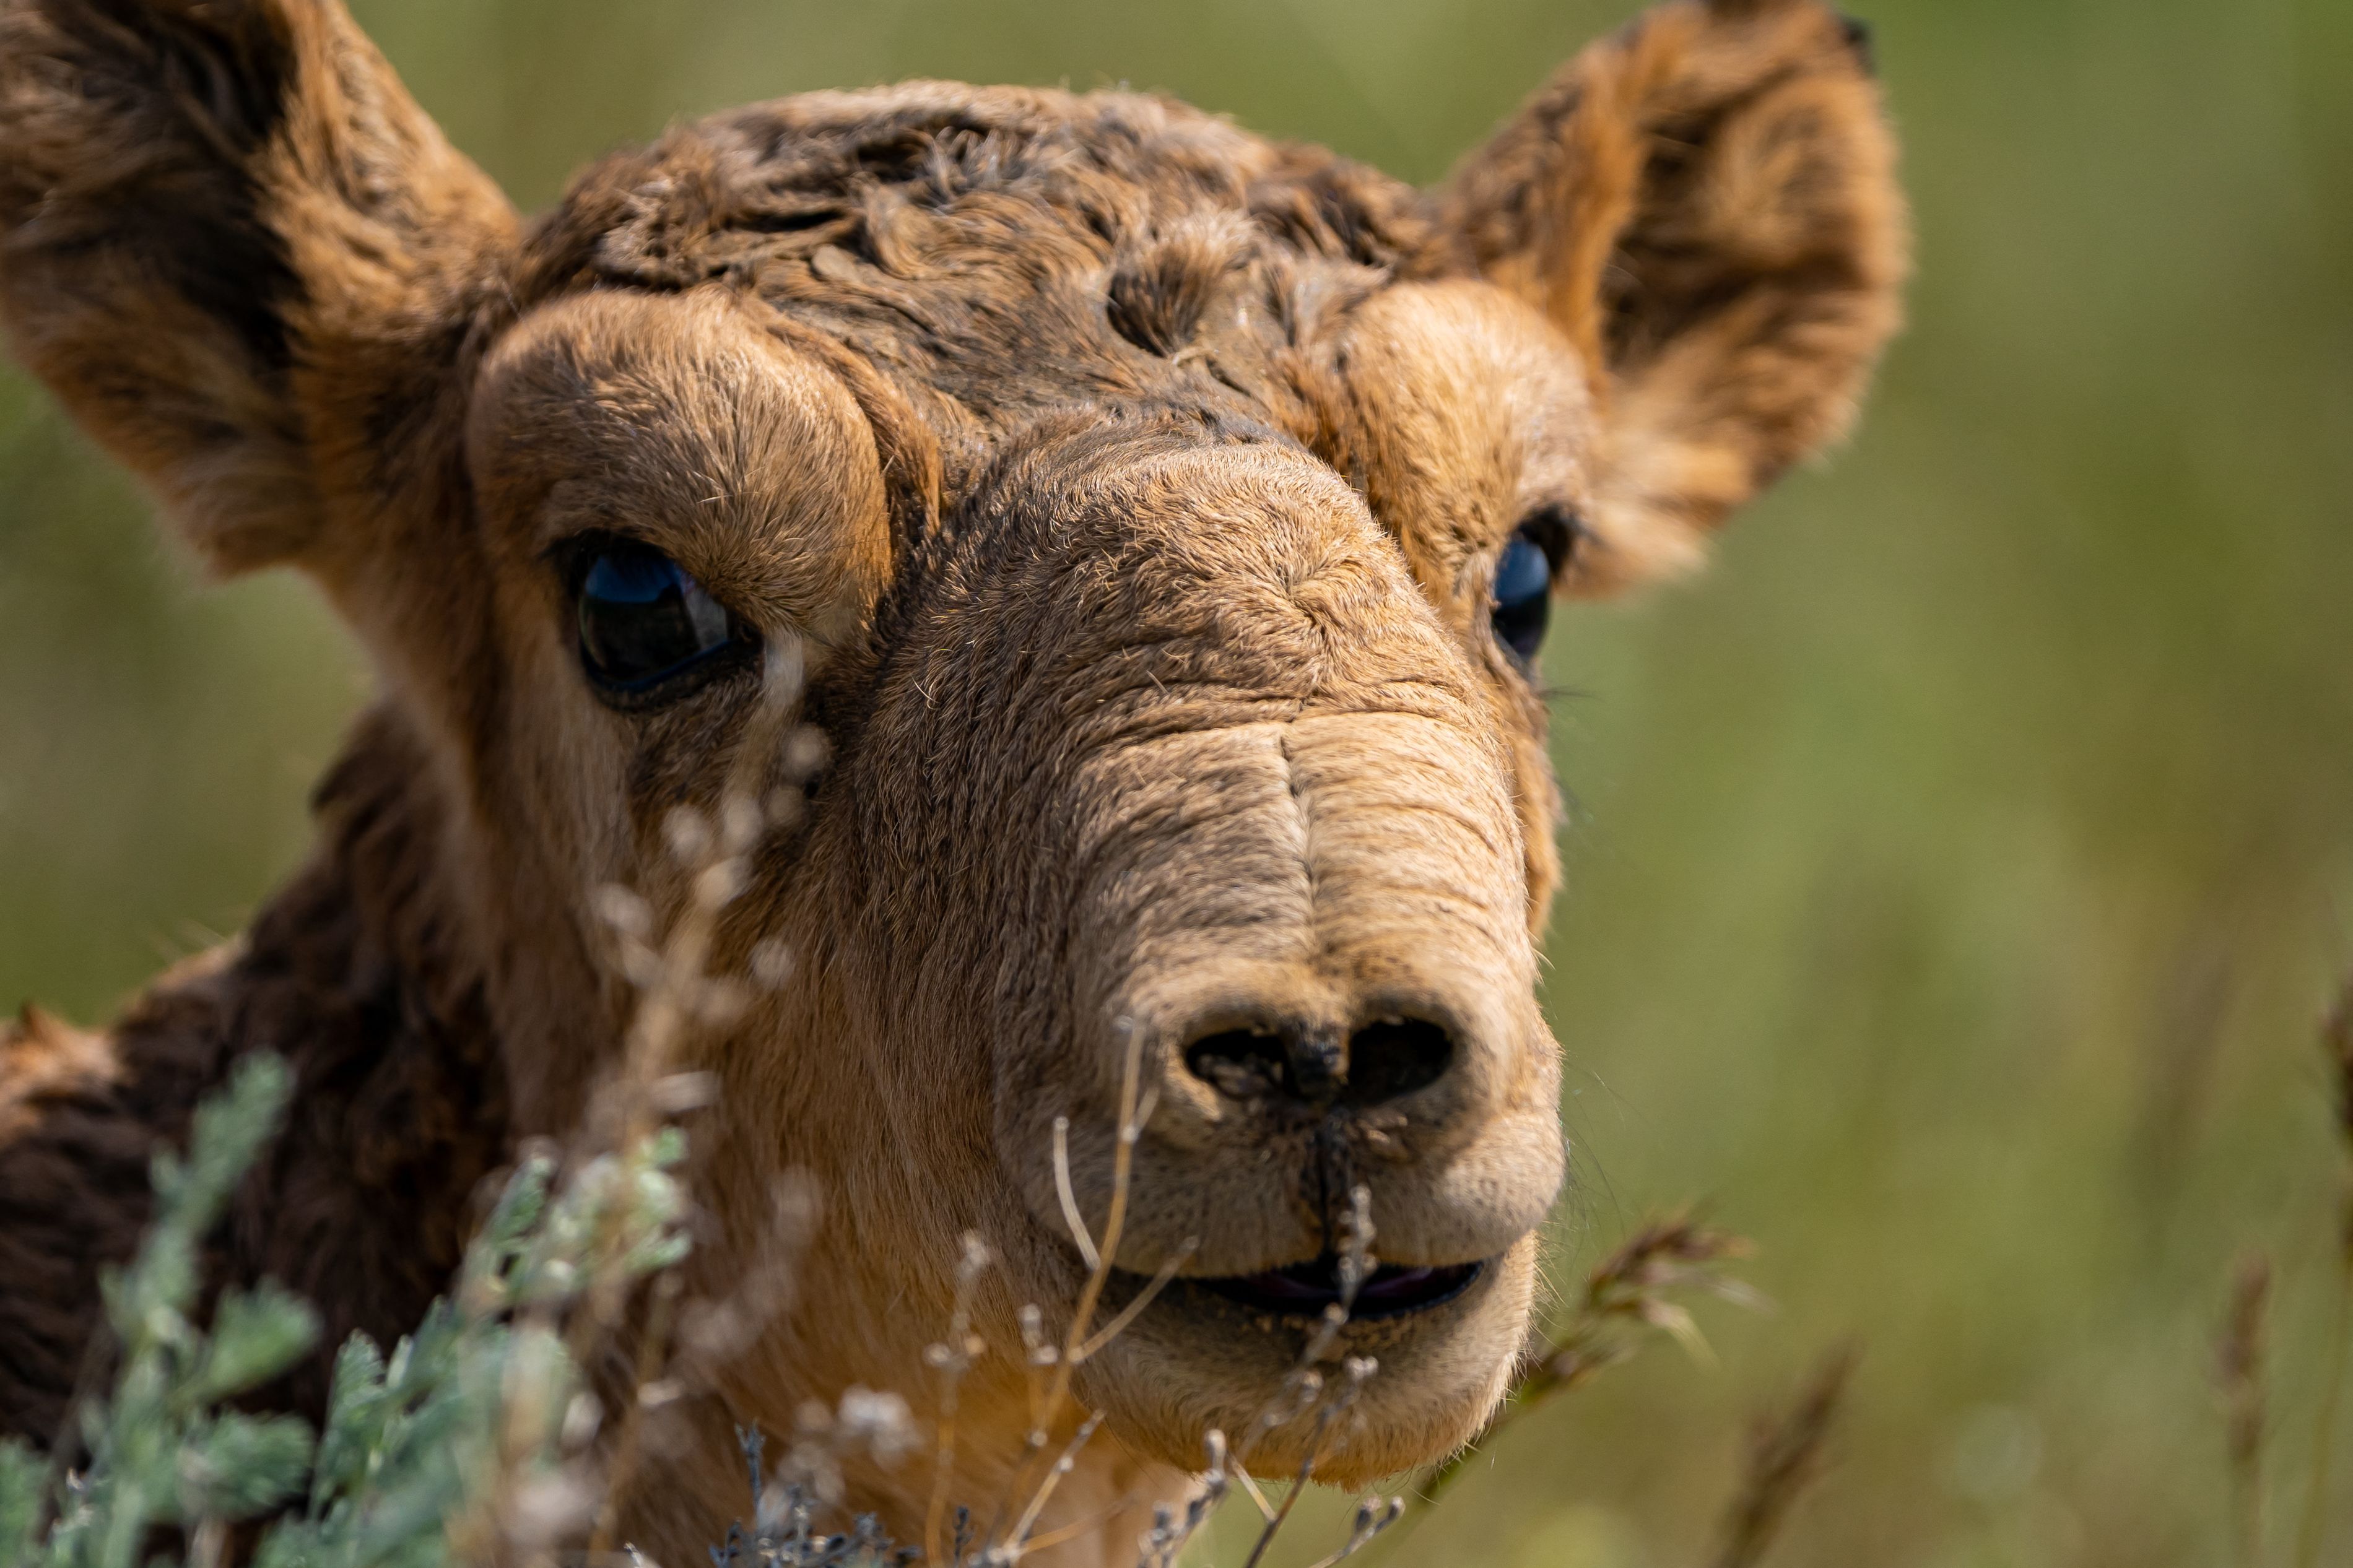 A newborn Saiga calf lies in the steppe on the border of Akmola and Kostanay regions of Kazakhstan on May 8, 2022. - In 2015, a nasal bacteria wiped out more than half of the worlds Saiga antelope population, spurring disturbing images of carcasses strewn across the vast steppe of Central Asia. But now the species is bouncing back, with Kazakh authorities hailing protective measures for a creature that survived the Ice Age. 